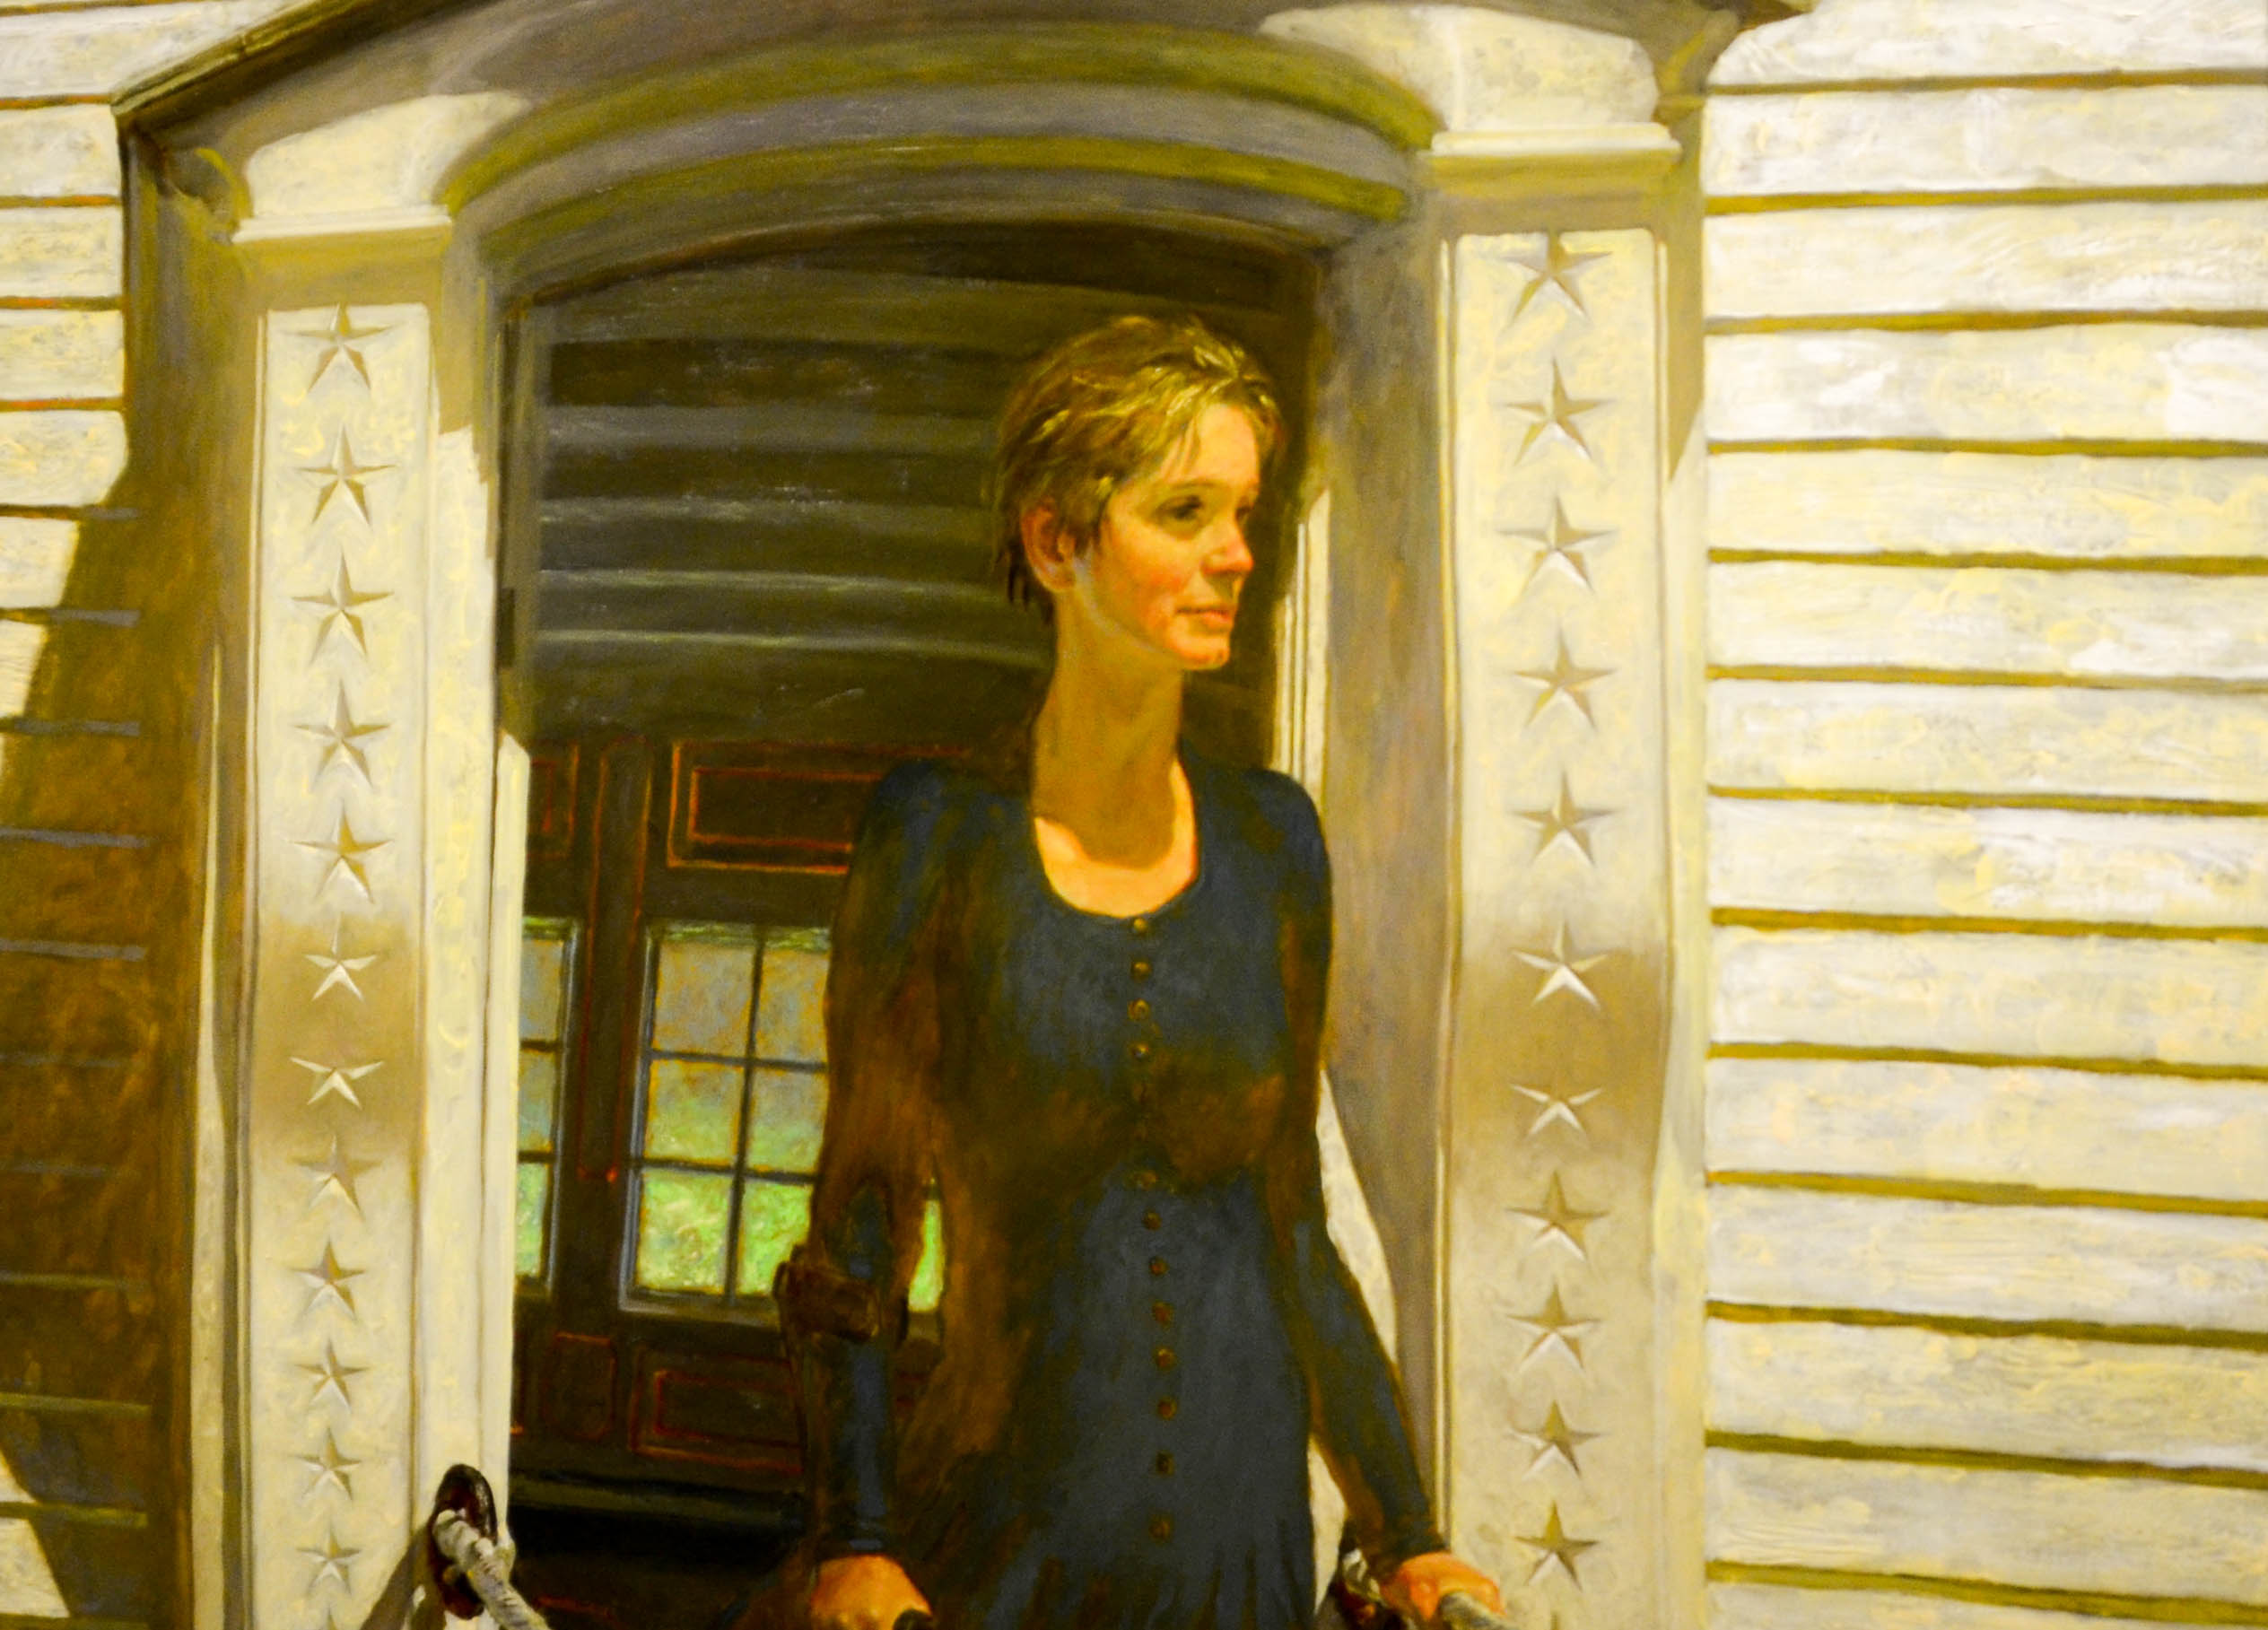 Jamie Wyeth's wife, Phillys, emerging from their lighthouse after a long illness.